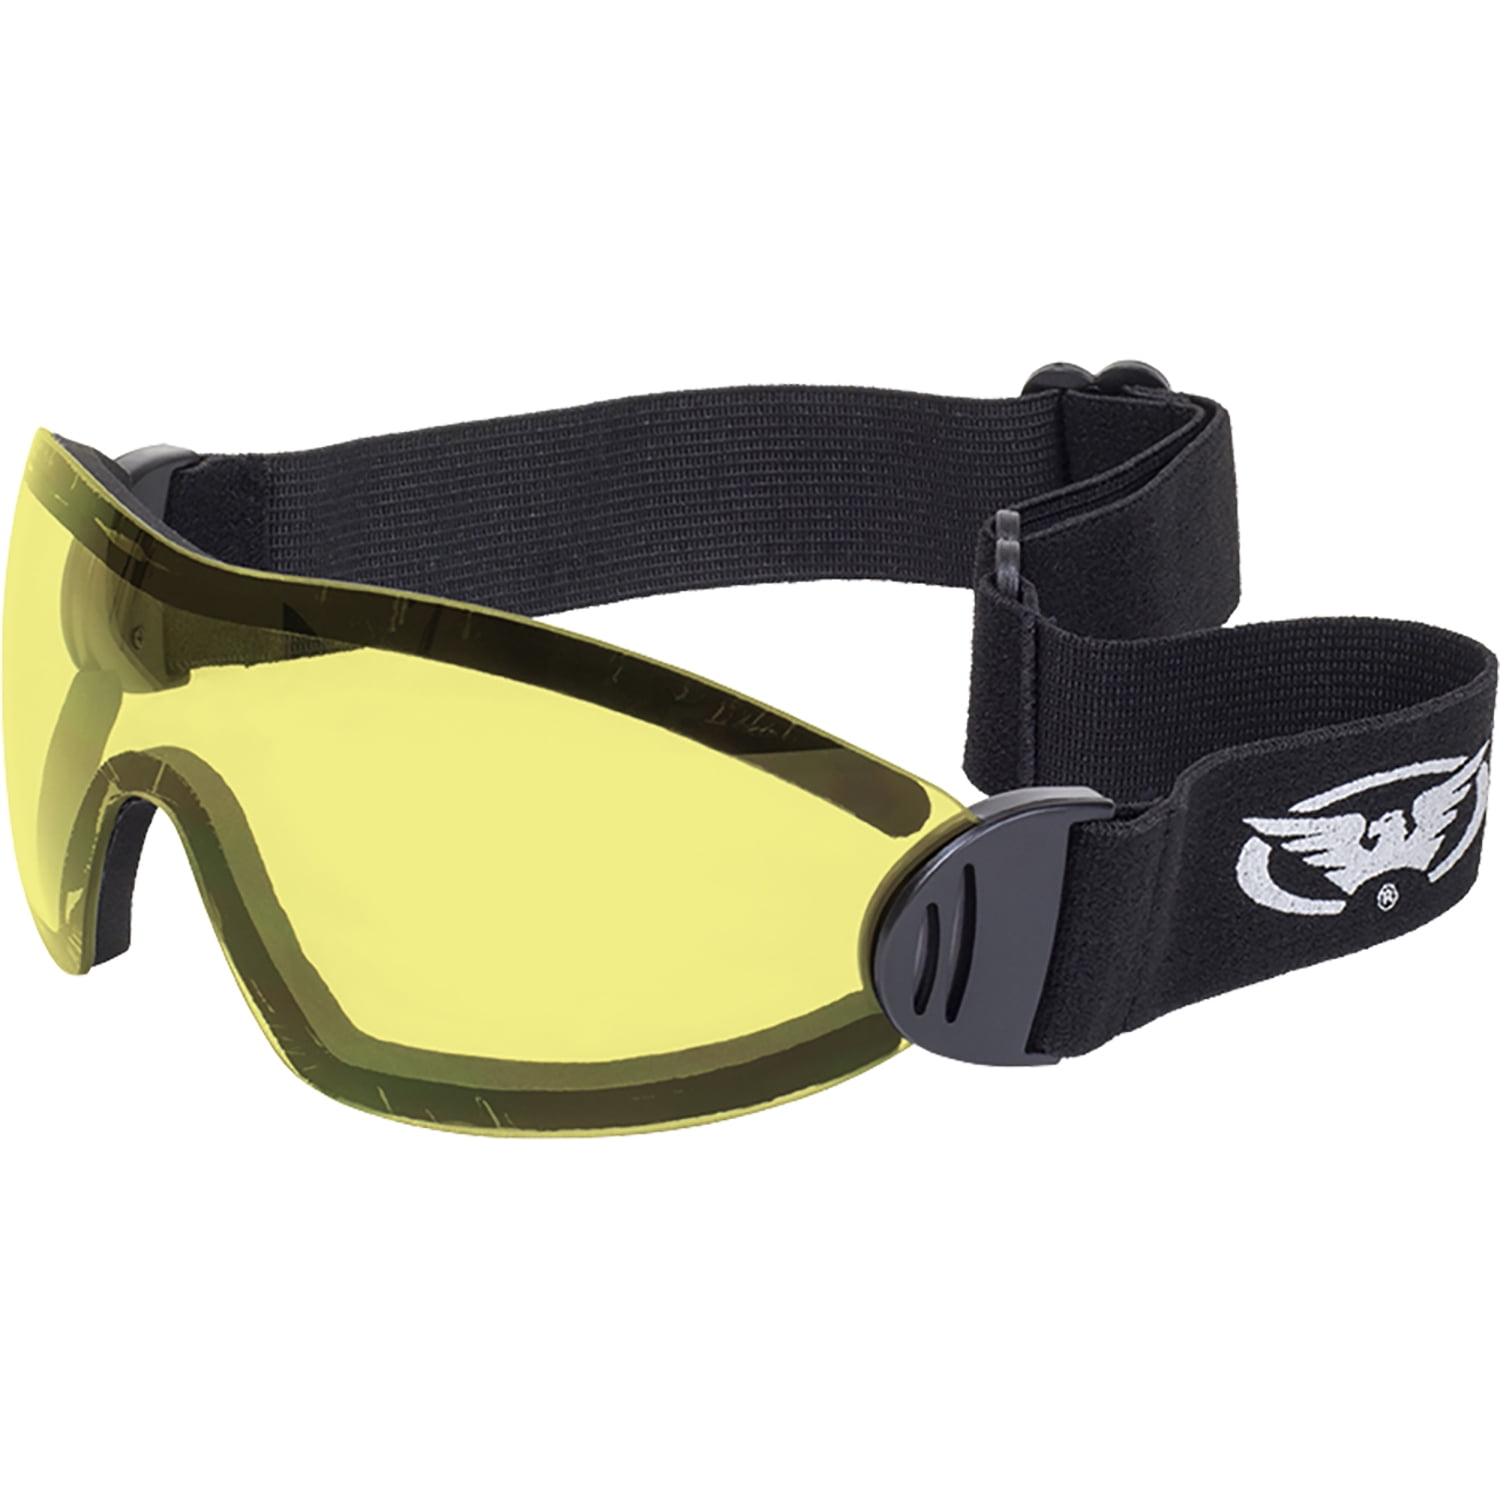 Global Vision Eyewear Flare Anti-Fog Goggles with Storage Pouch 